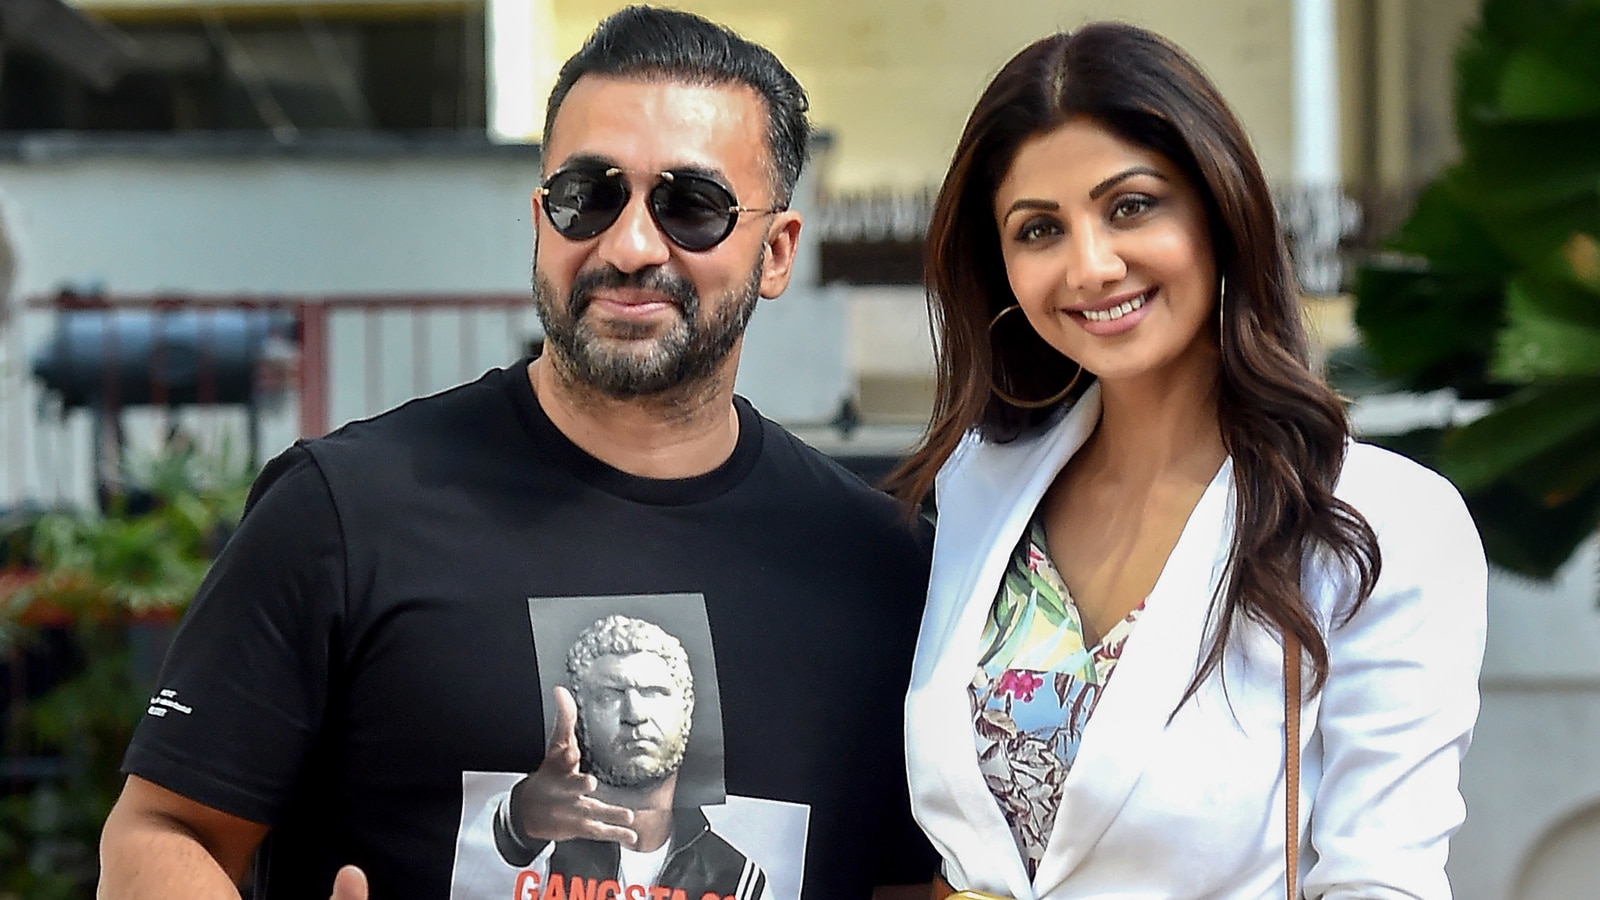 Sex Videos Shilpa Shetty - Actor Shilpa Shetty's husband Raj Kundra arrested for making porn: What we  know so far | Latest News India - Hindustan Times